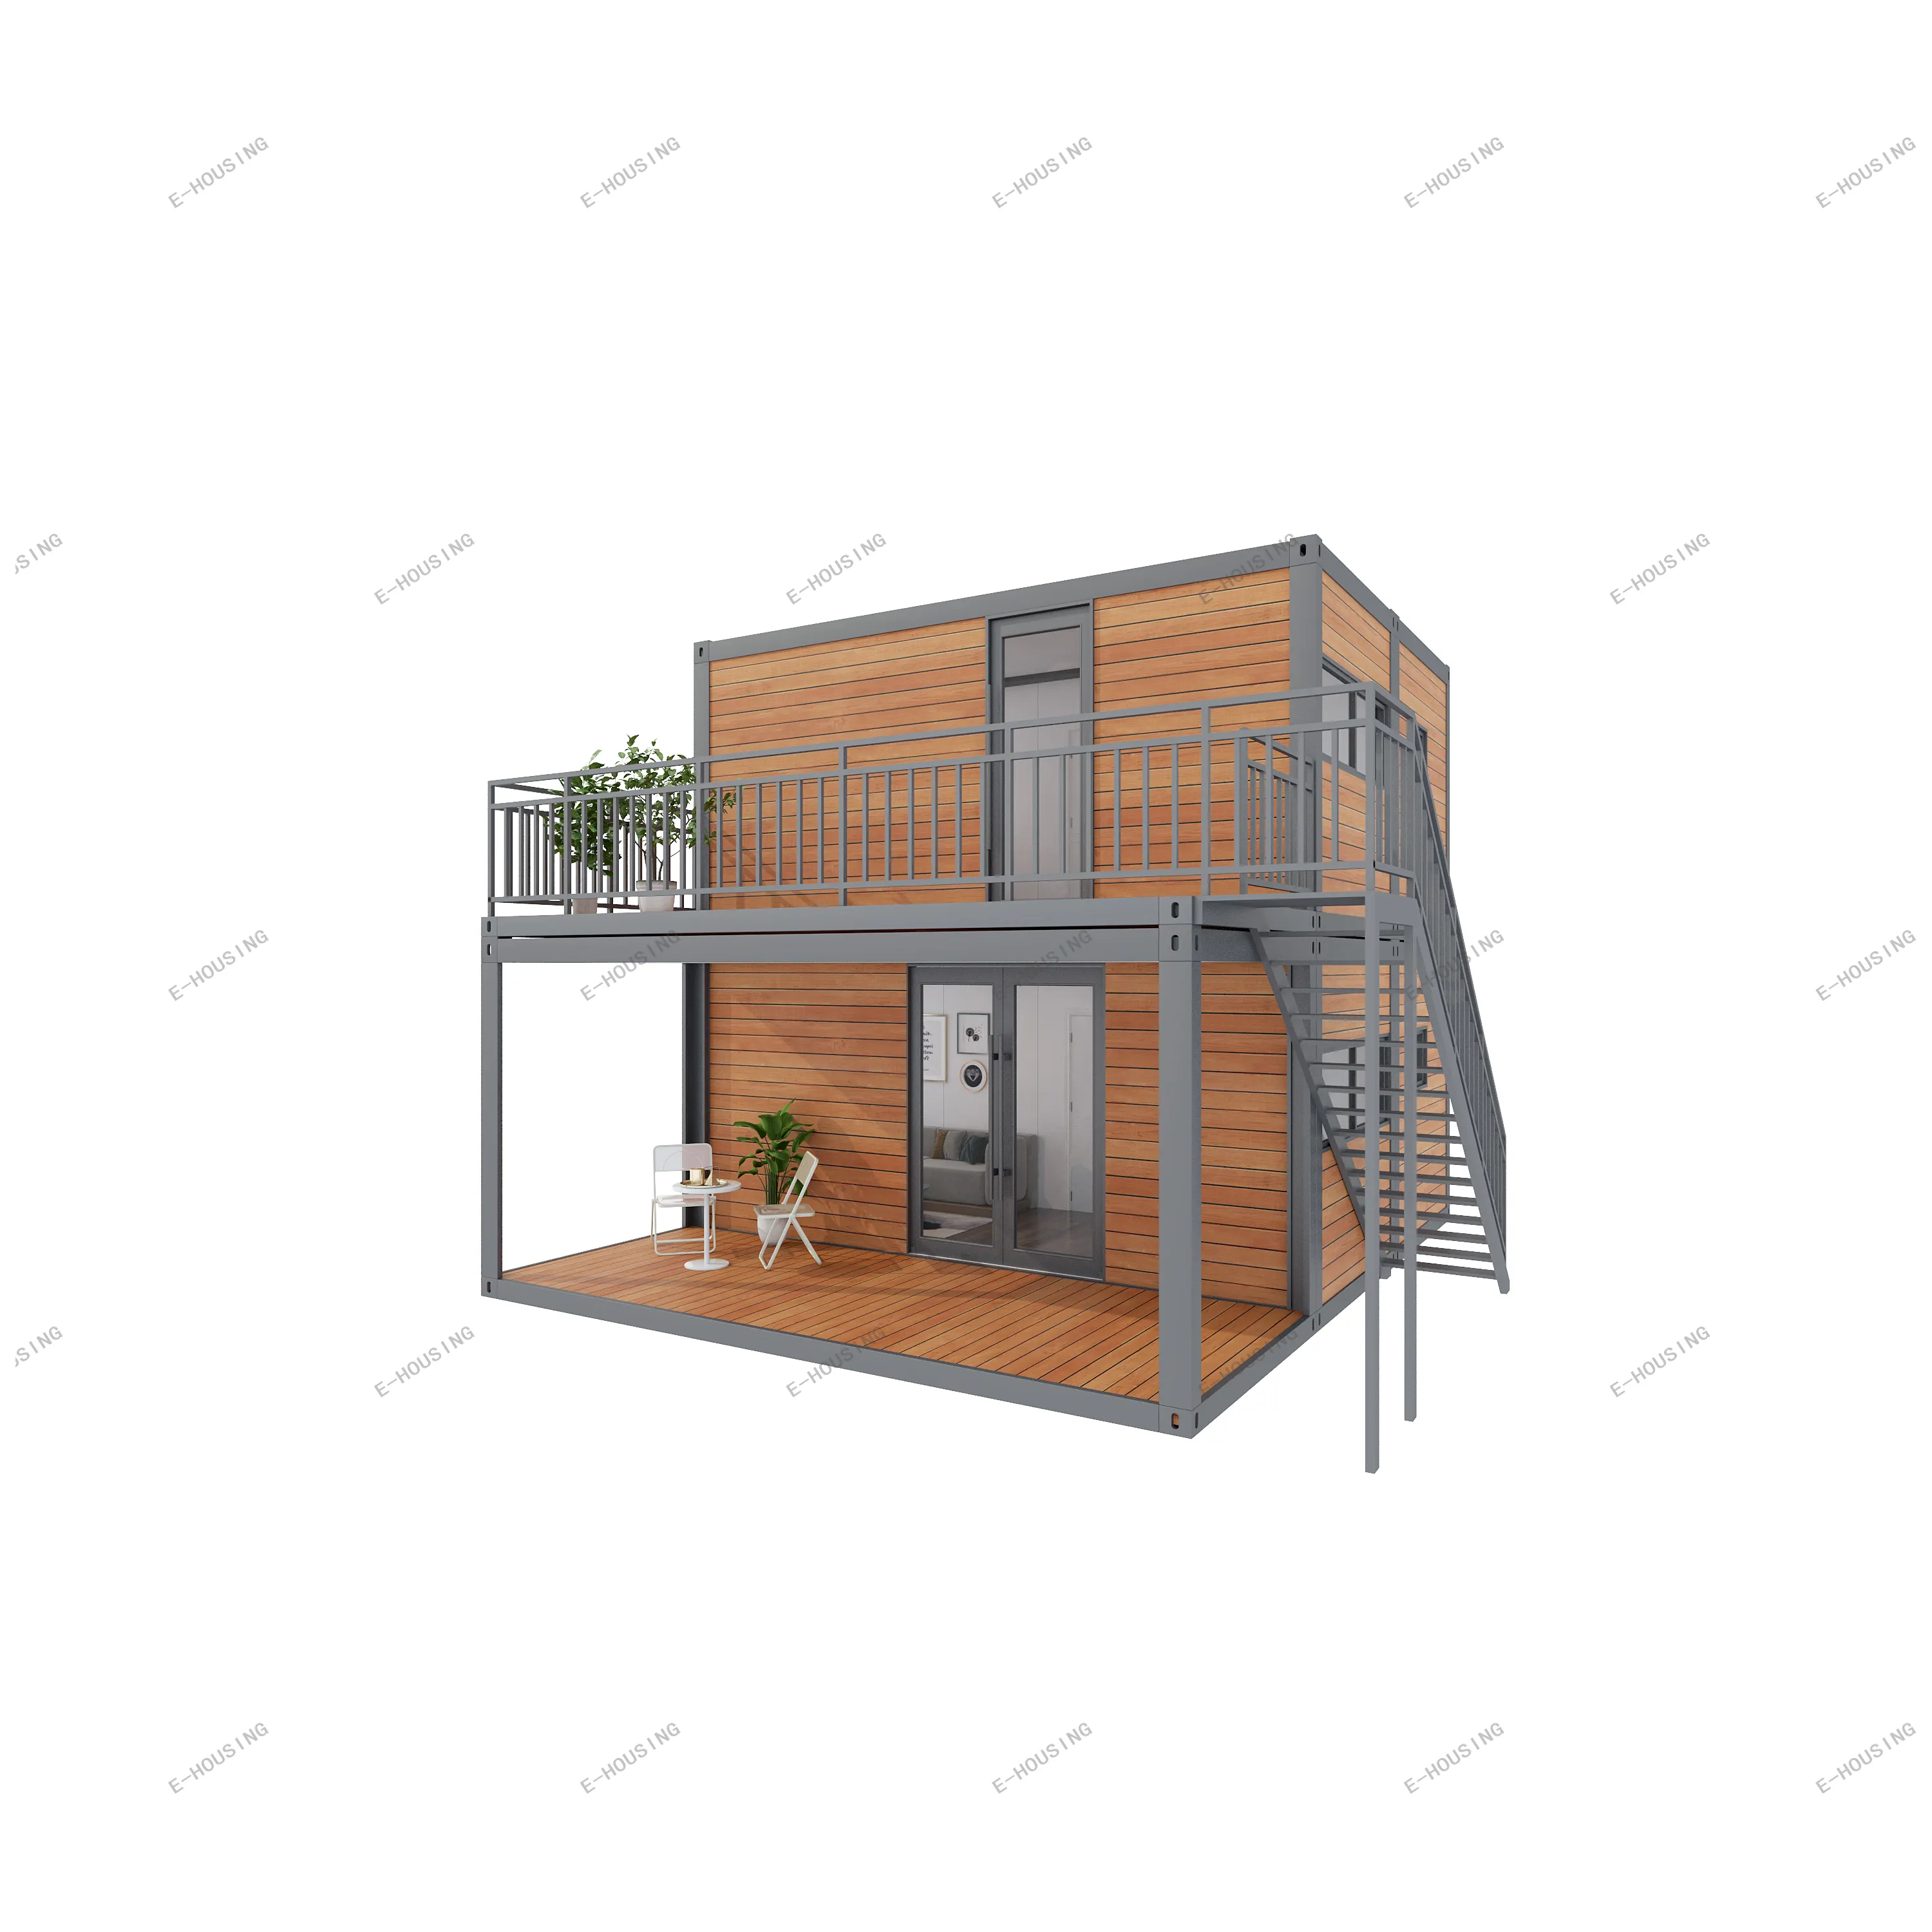 Storey Prefab Expandable Pool Croatia Shop Solar Boat Portable Living In Ghana Foldout Home 20 Ft Container House For Sale